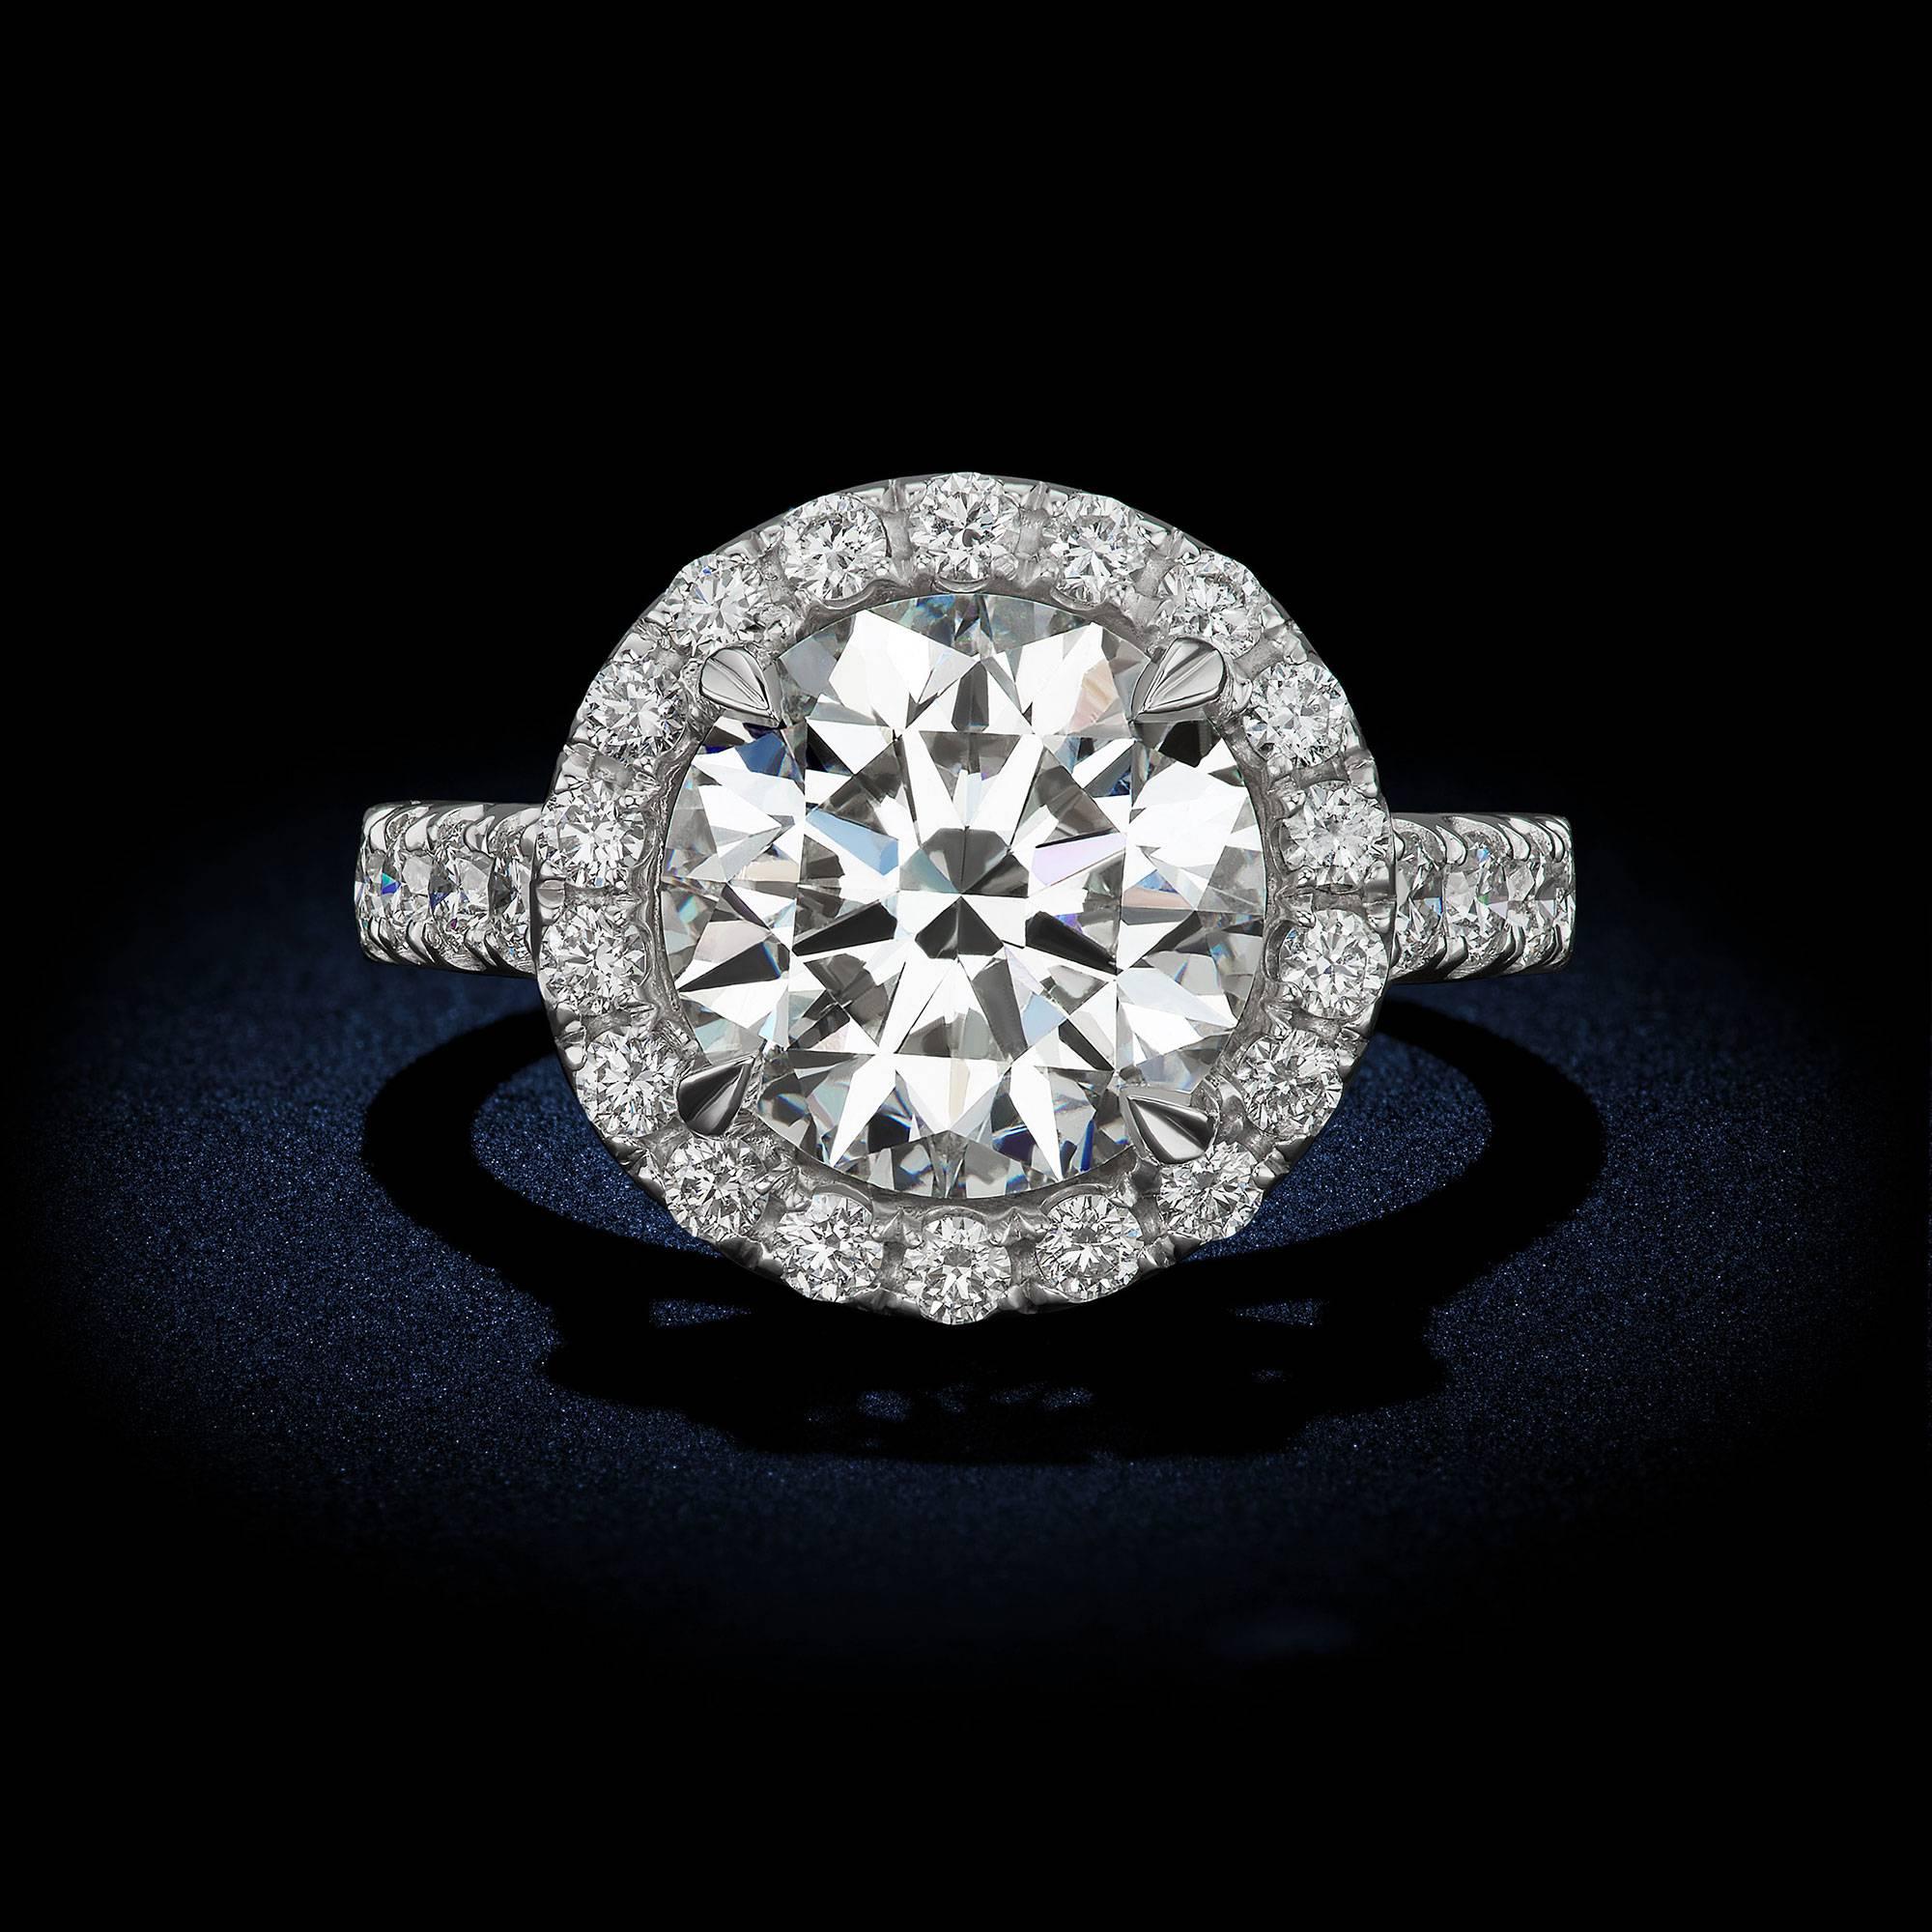 Round Brilliant Diamond Ring
A Stunning 4 Carat Round Brilliant Diamond creates a classic look in this timeless design. Having a color and clarity of H/SI1 accompanied with a GIA Certificate. Completing this look with perfectly matched display of